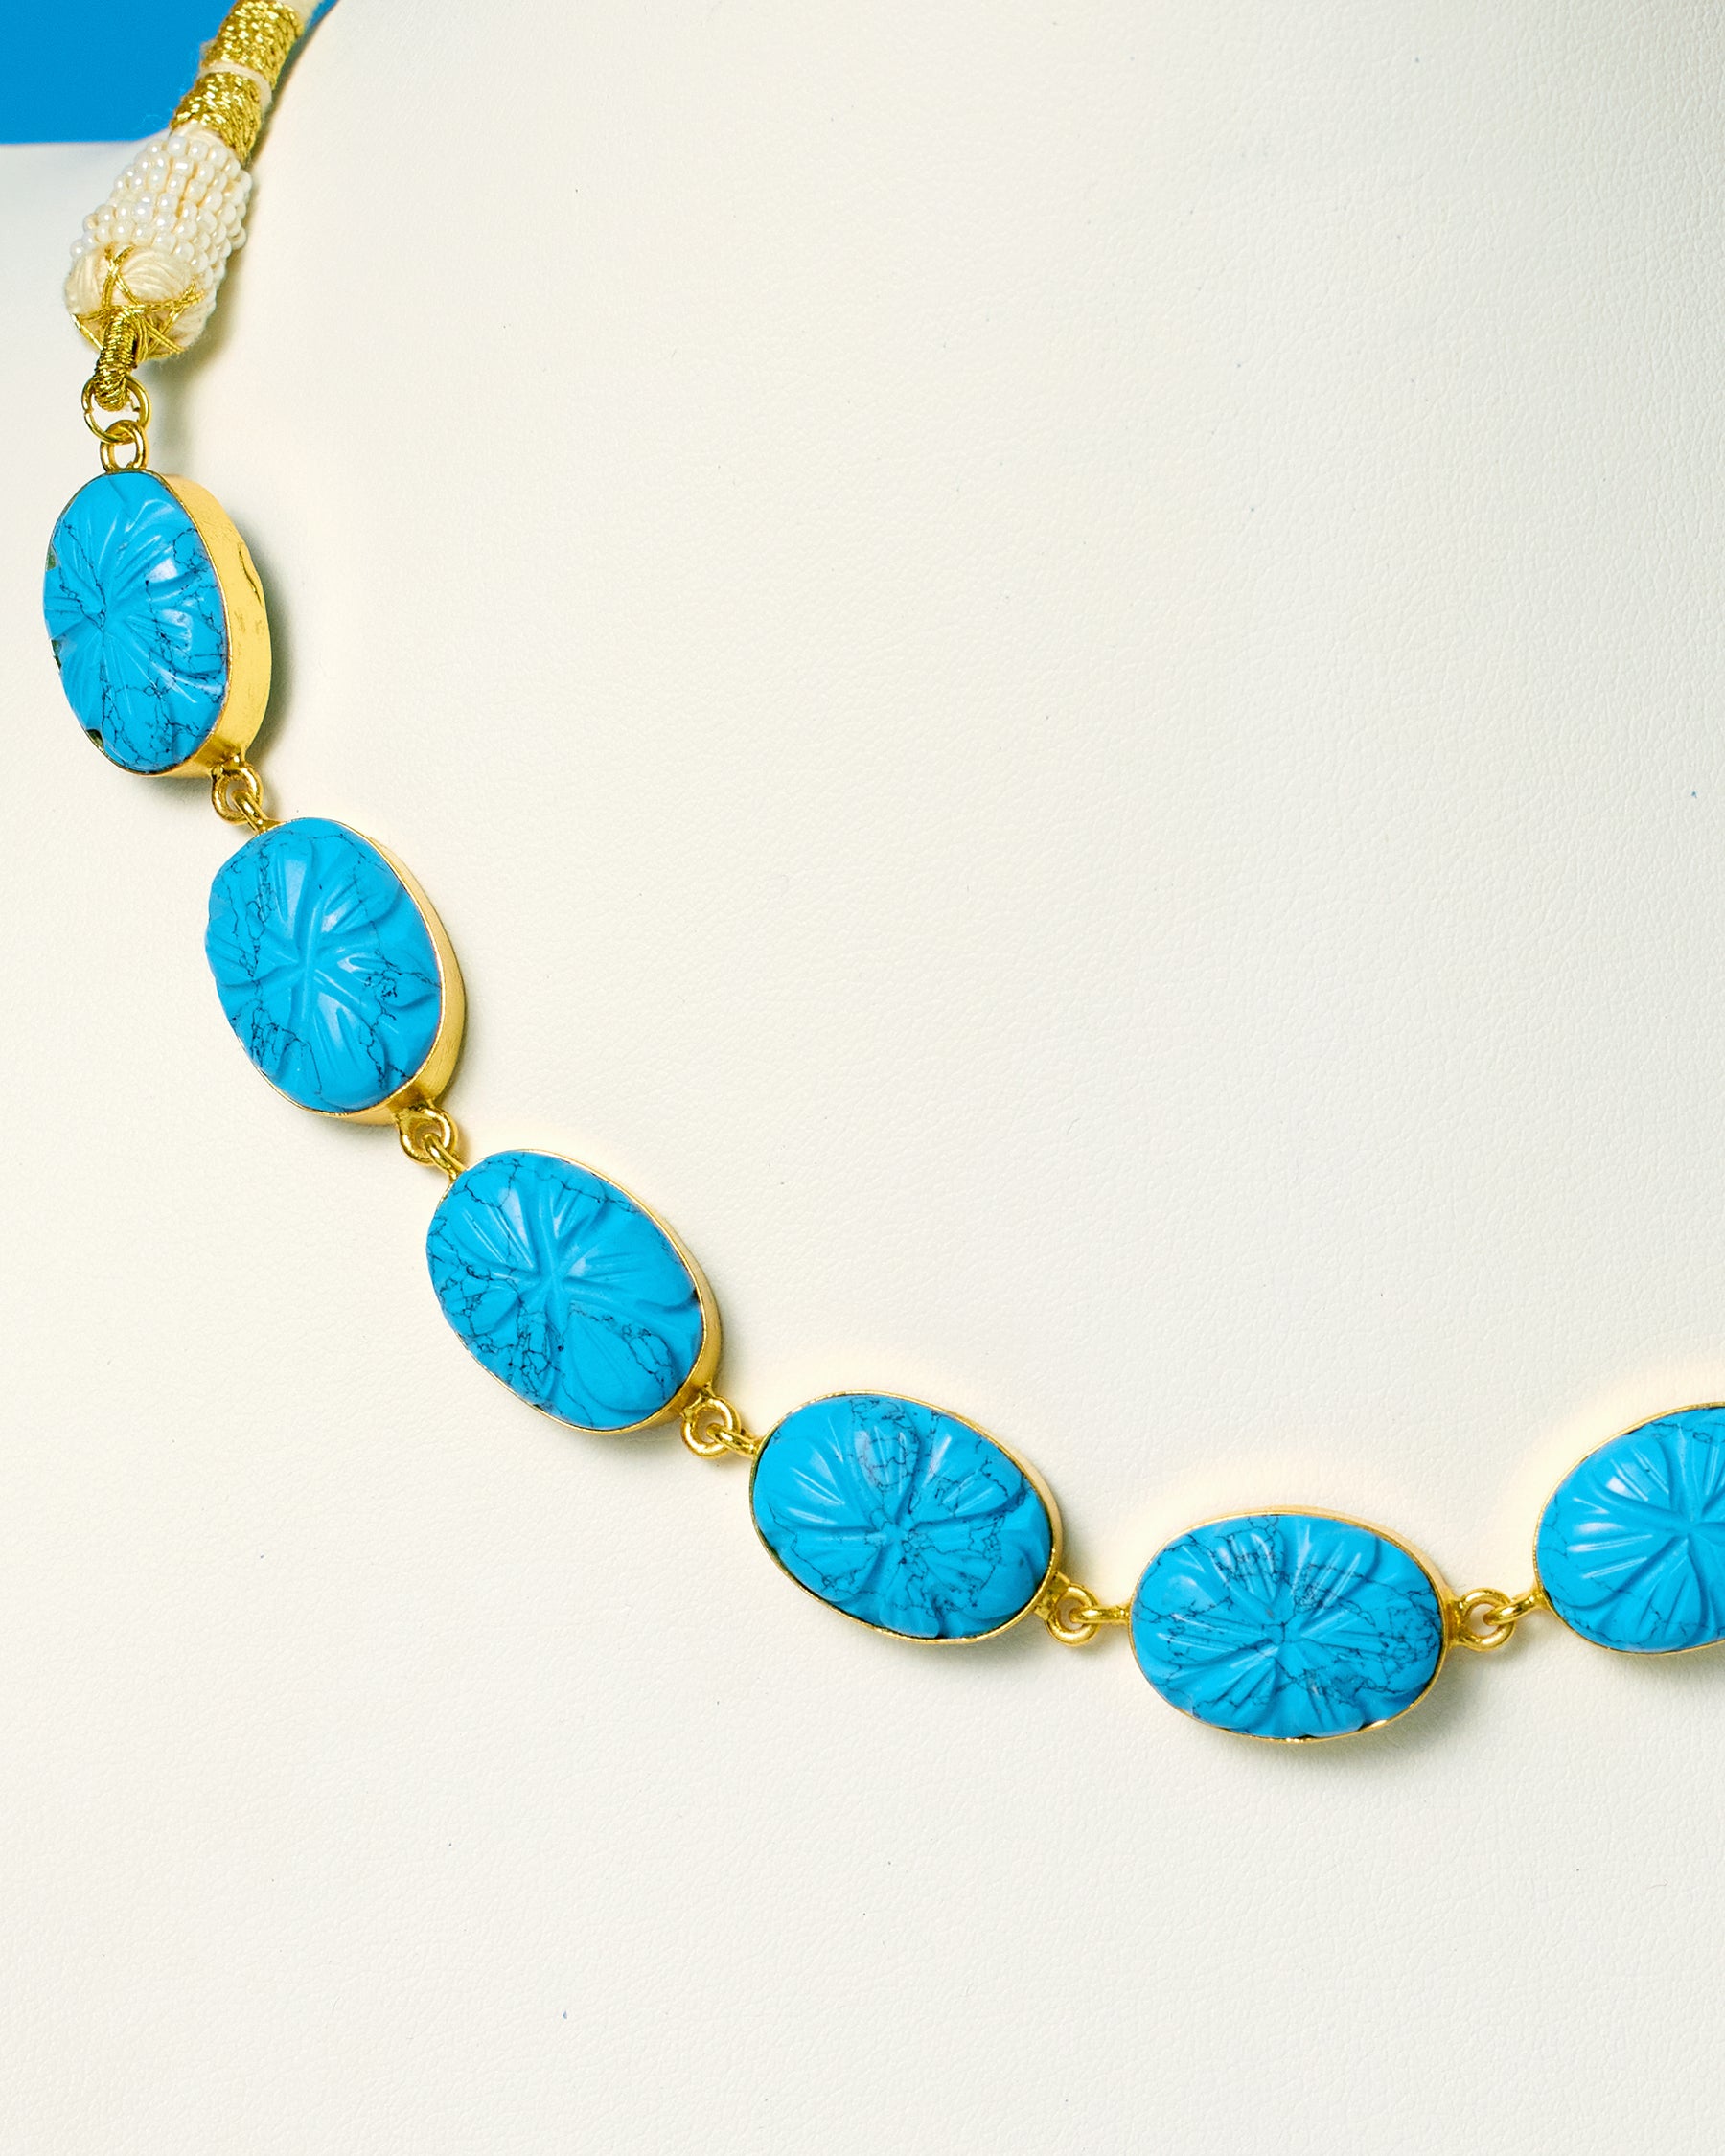 Skye Necklace in Turquoise Colored Stone-Detail